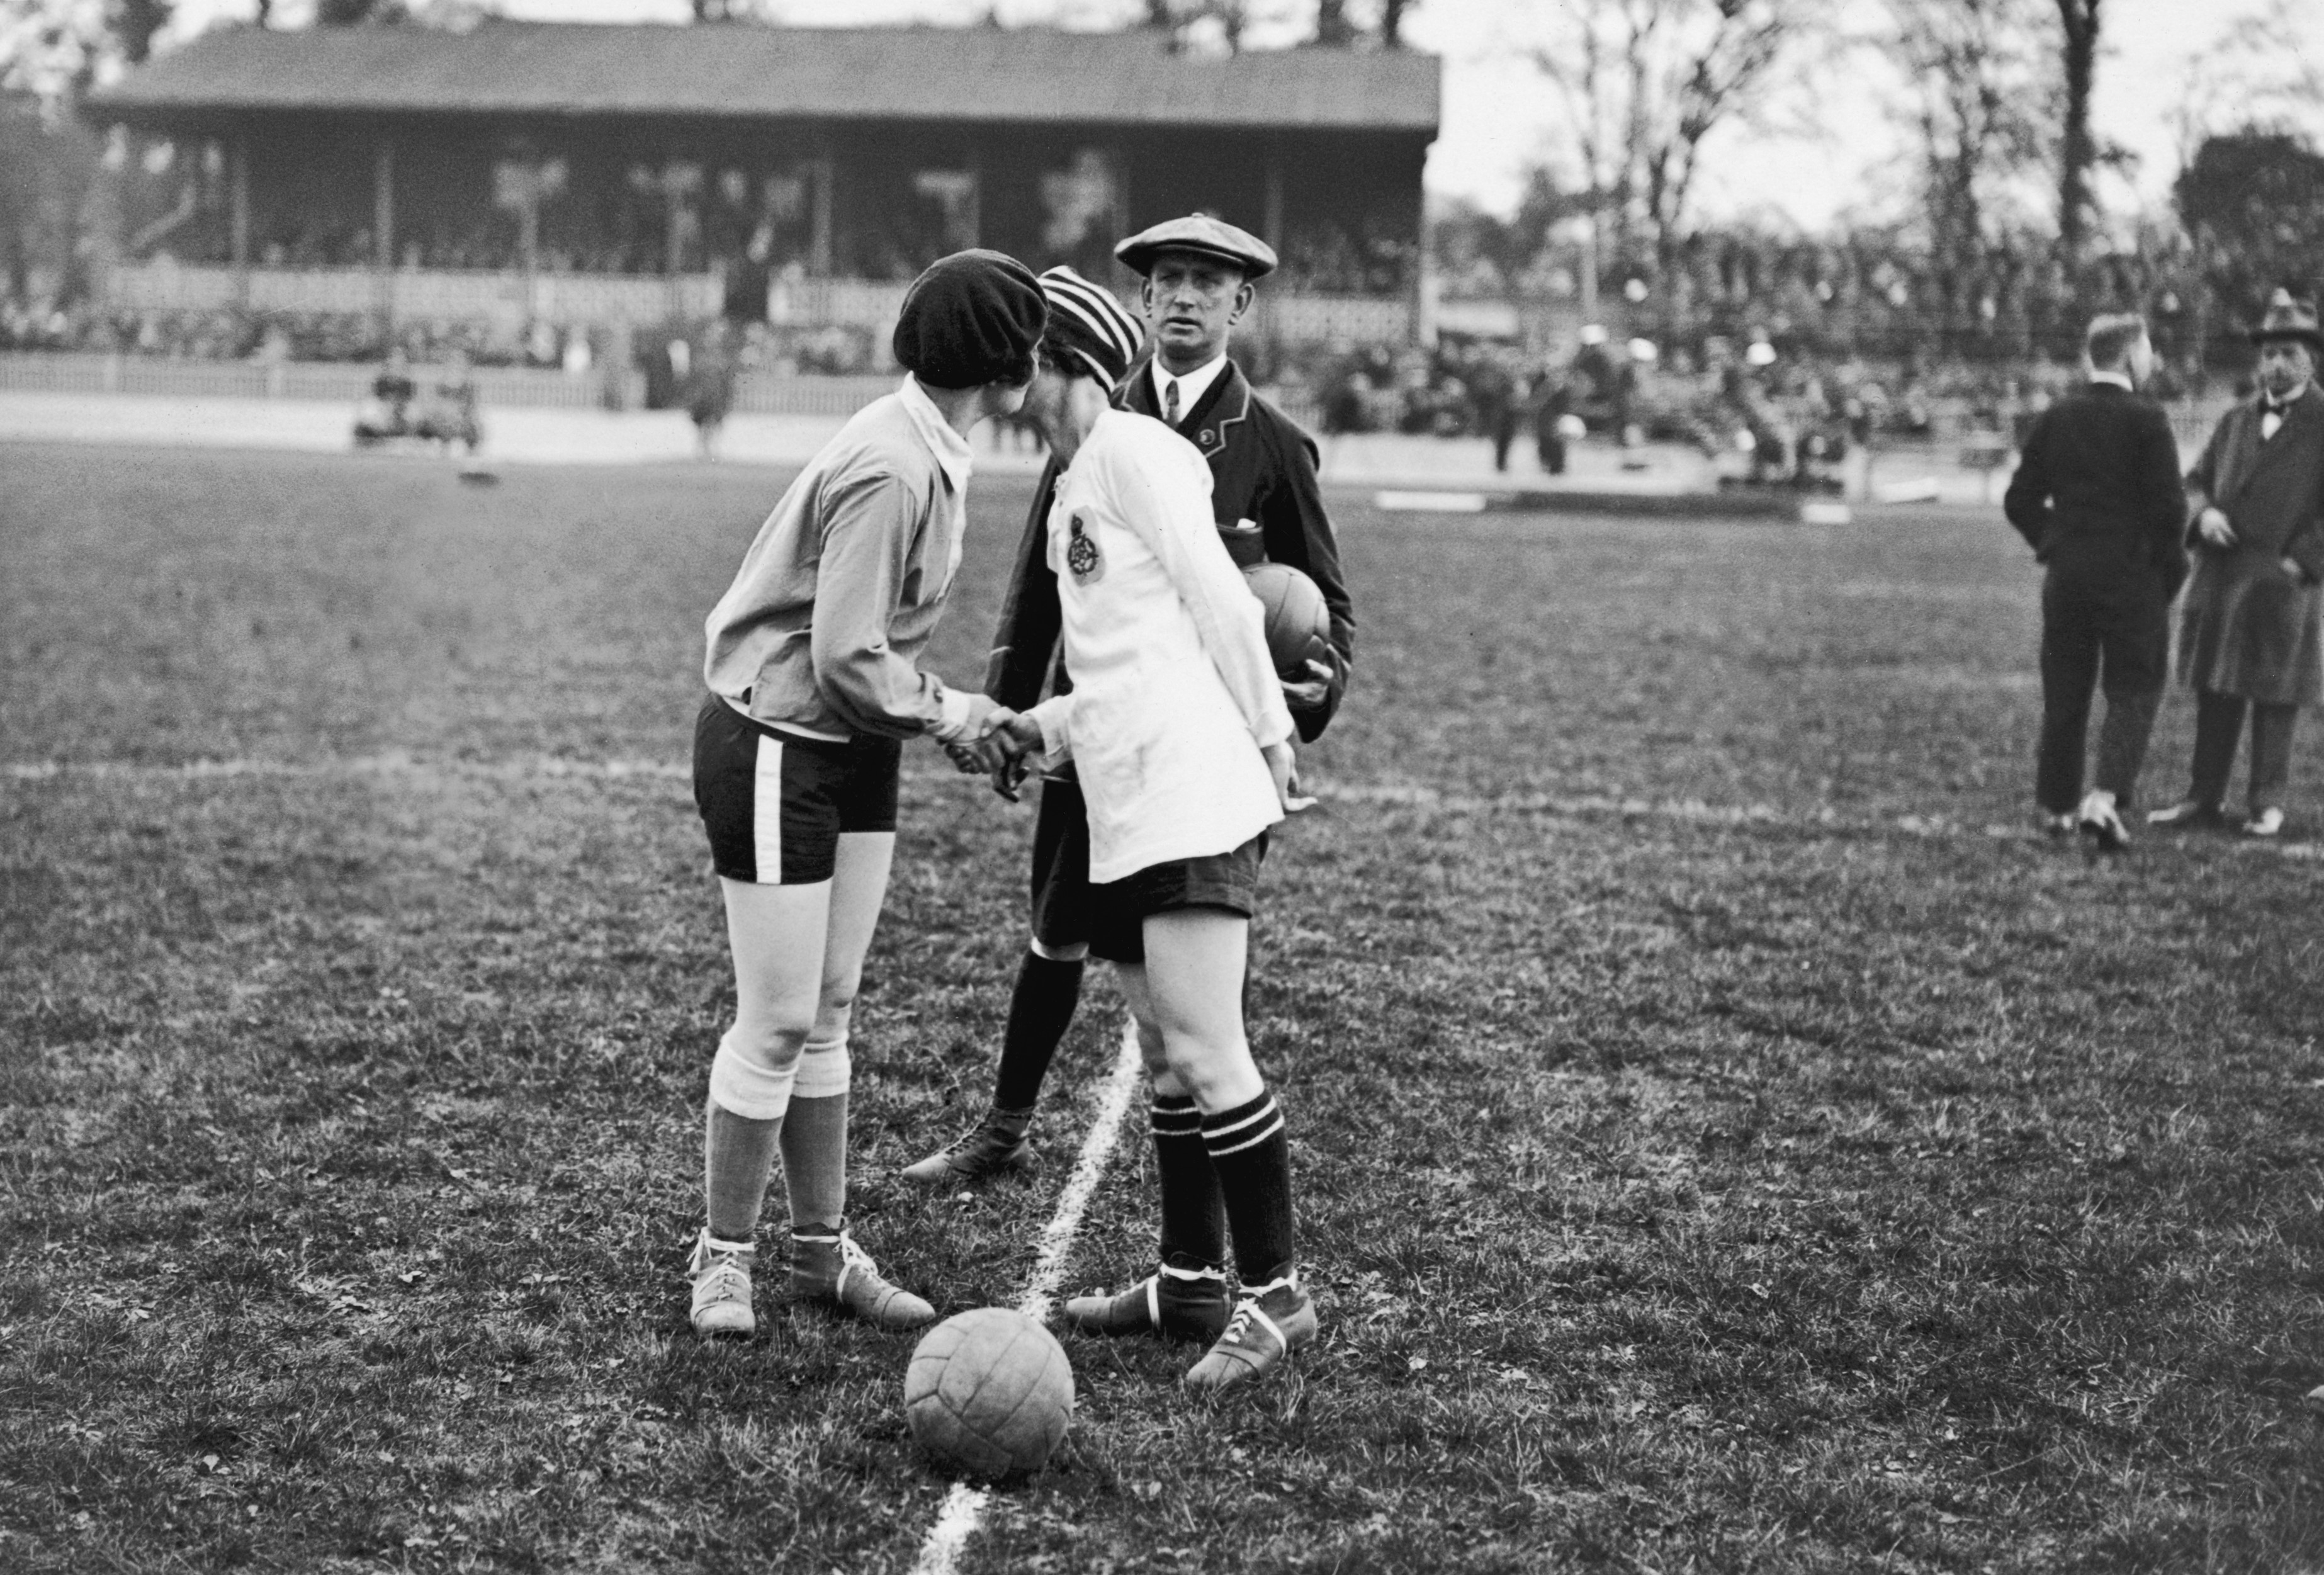 Two women kiss before kick off in an old football match